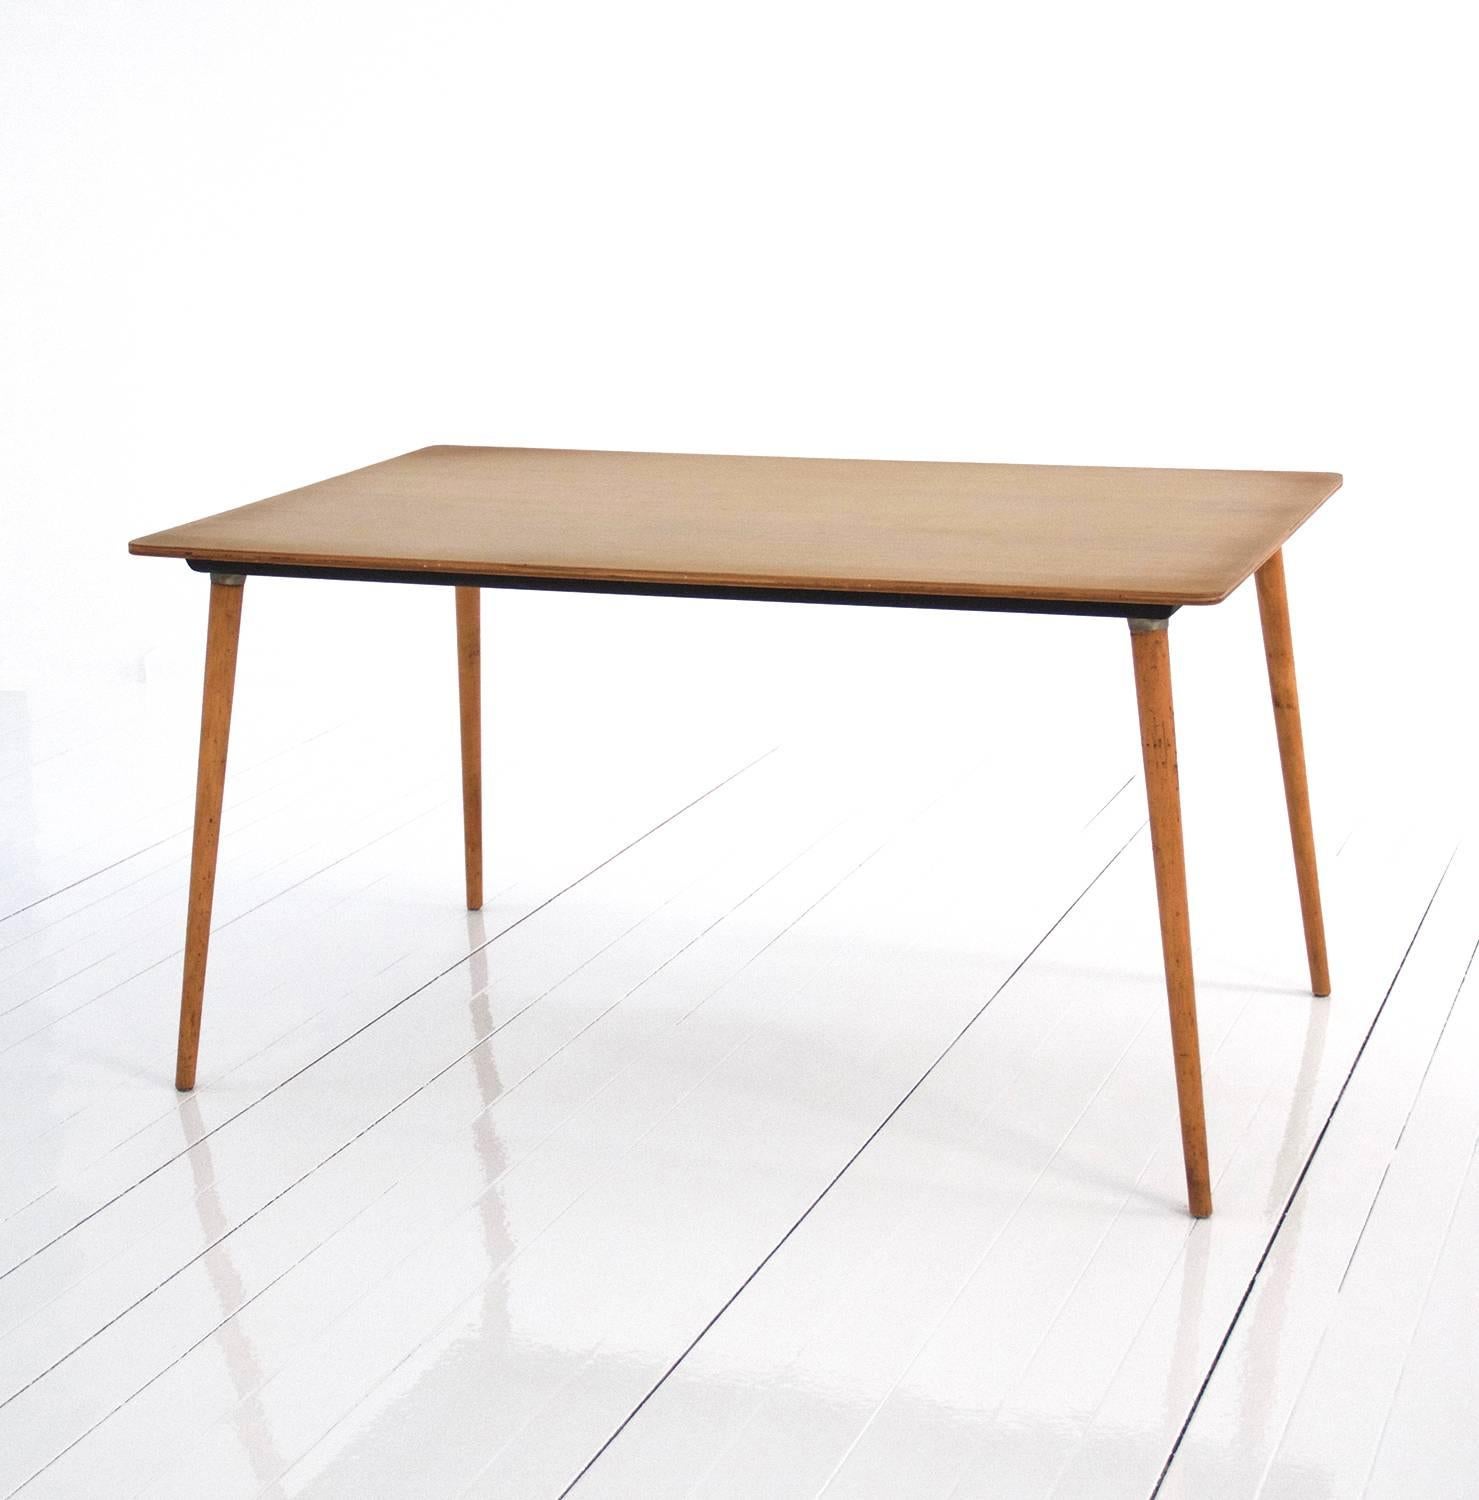 Mid-Century Modern Rare Table Designed by Charles and Ray Eames, Birchwood, 1940s, United States For Sale